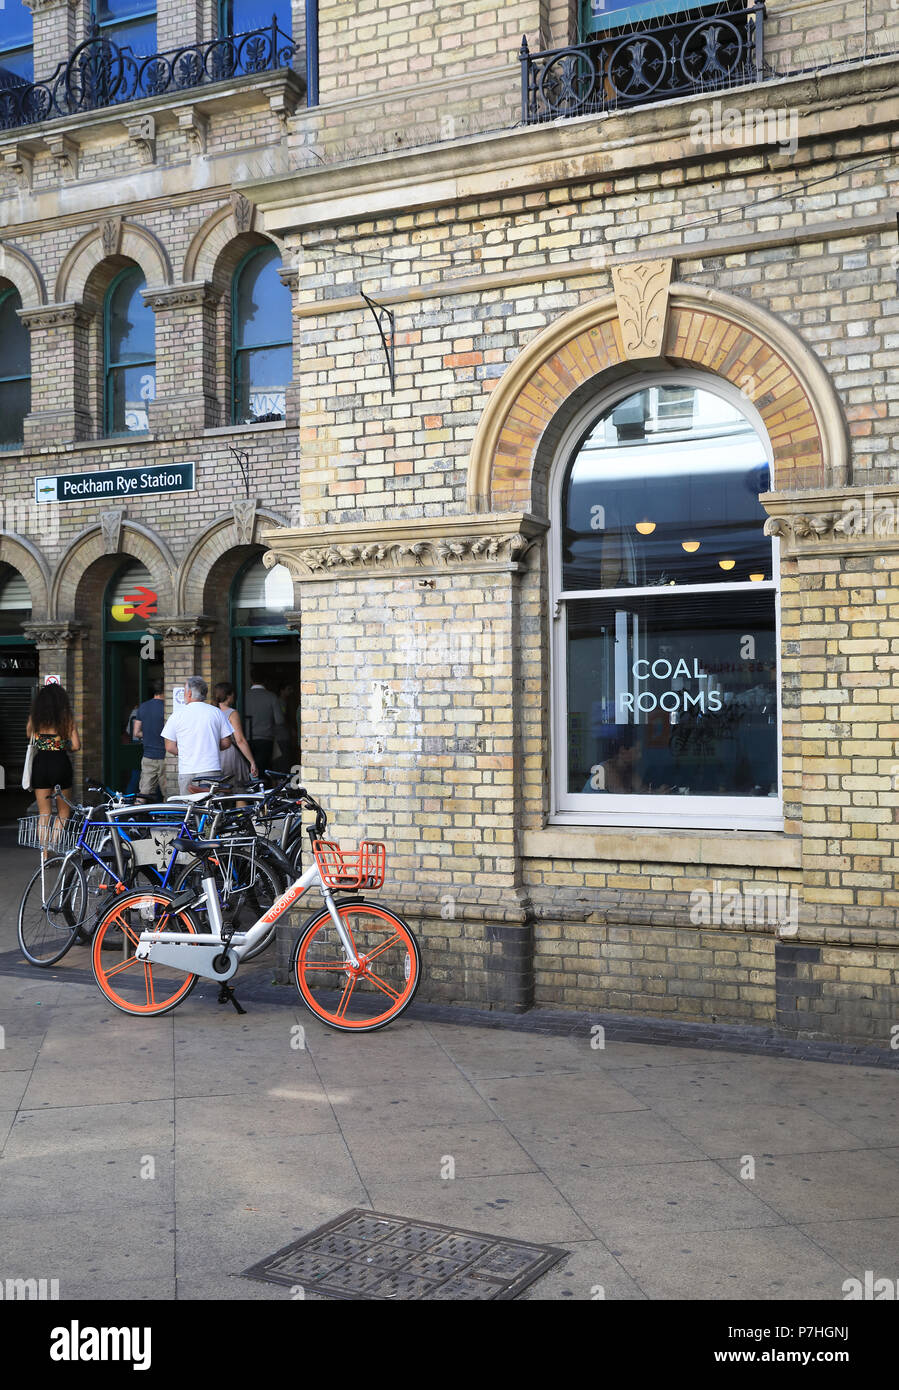 The acclaimed Coal Rooms restaurant in the old ticket office next to Peckham Rye station, in south London, UK Stock Photo